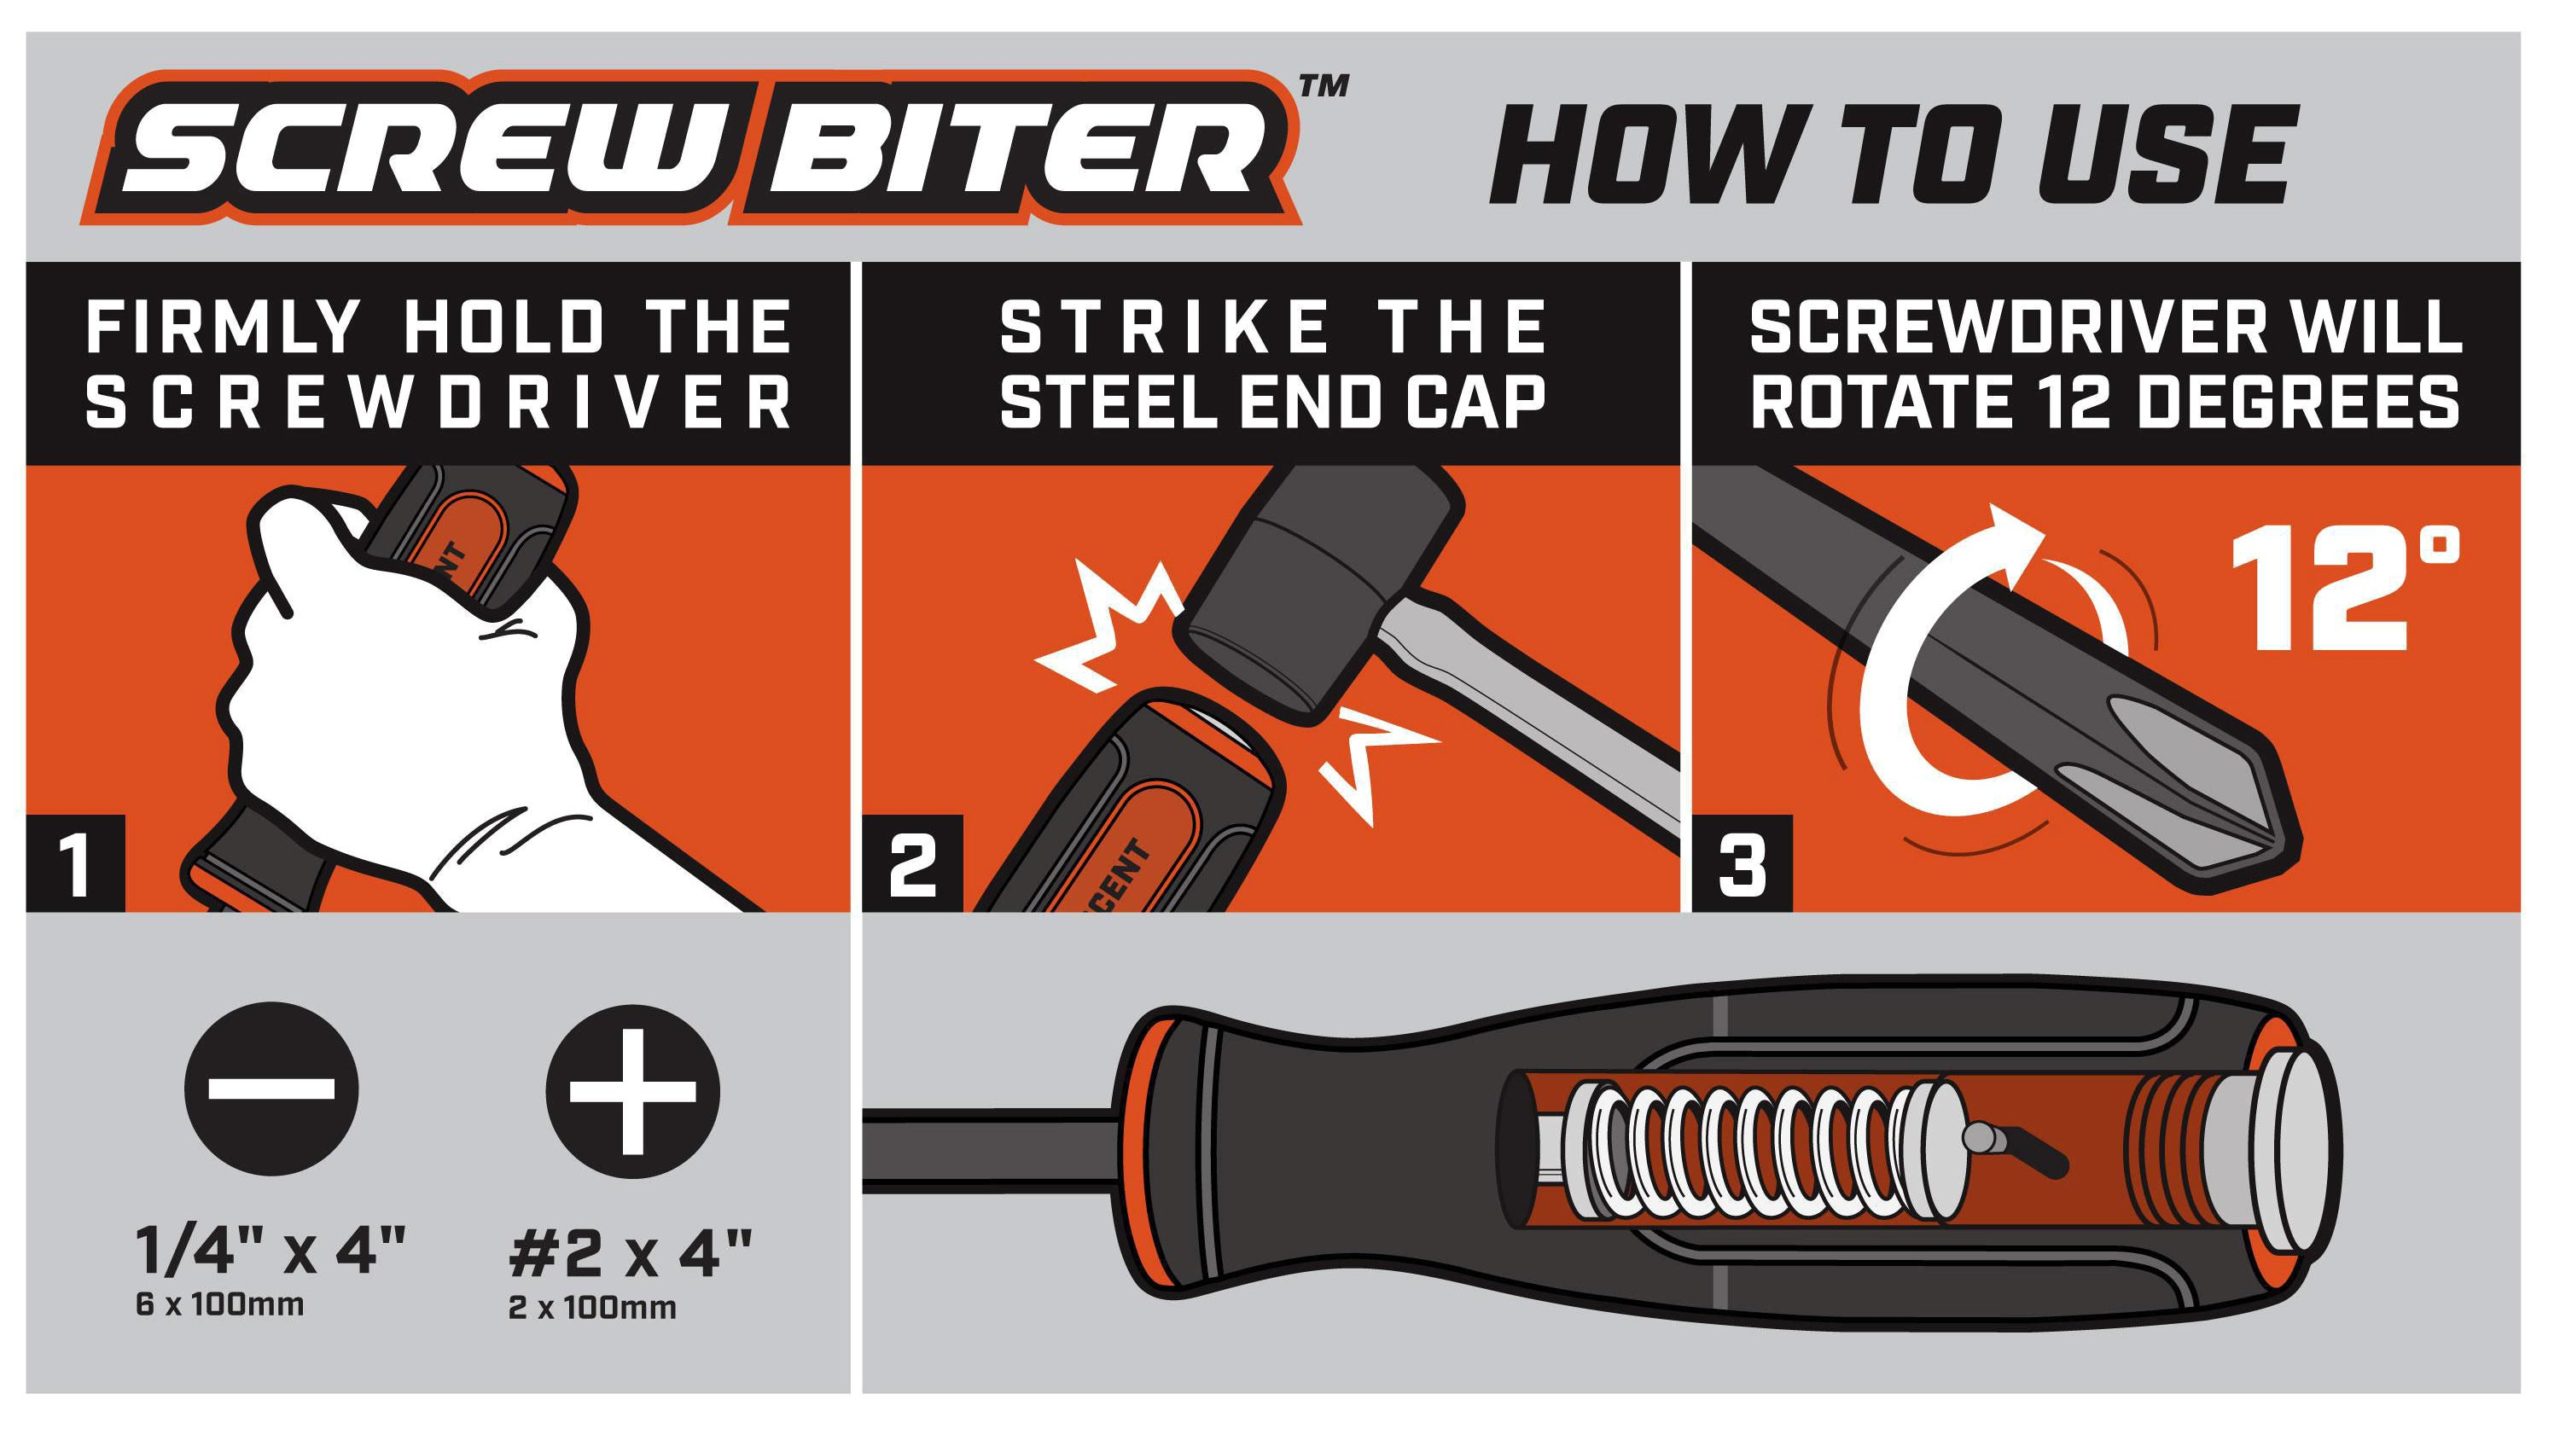 Clever Screwdriver Turns the Force of a Hammer Blow Into Extra Torque to Dislodge Stuck Screws